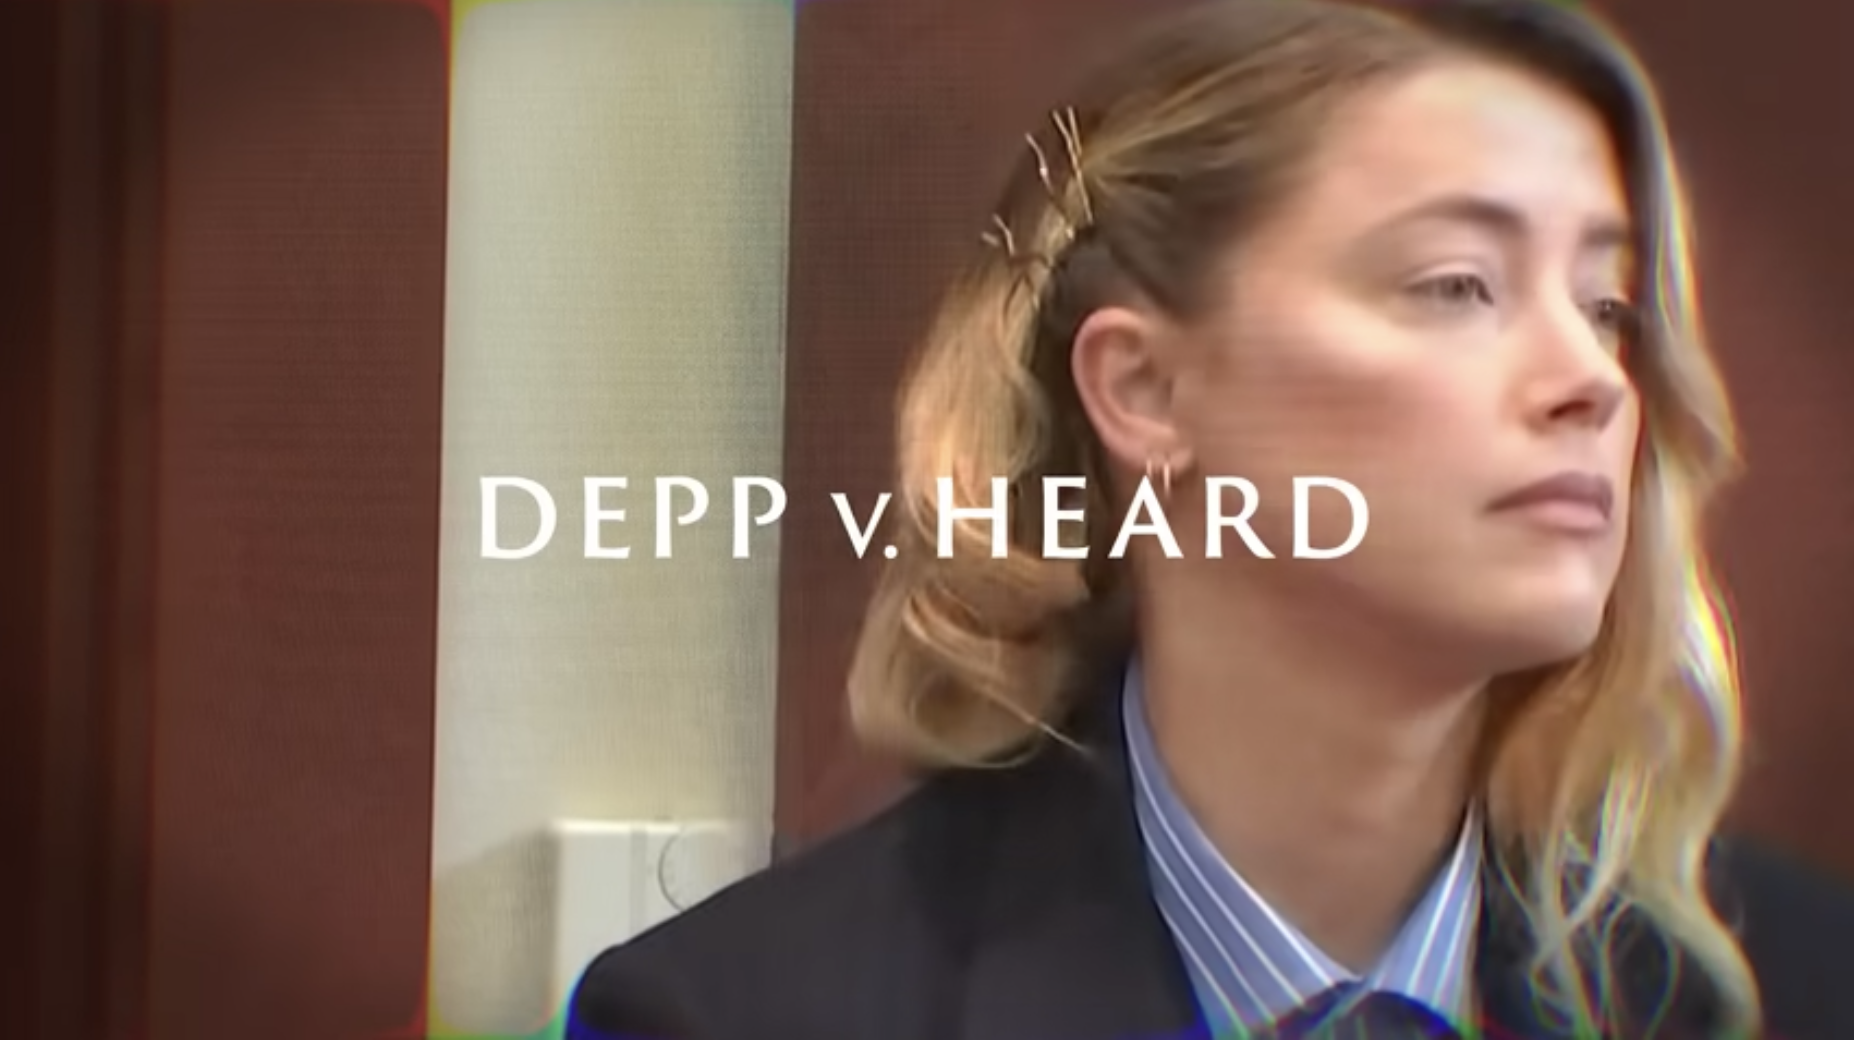 Johnny Depp, Amber Heard and the deeply unsatisfying matter of re-litigating their trial Johnny Depp, Amber Heard and the deeply unsatisfying matter of re-litigating their trial